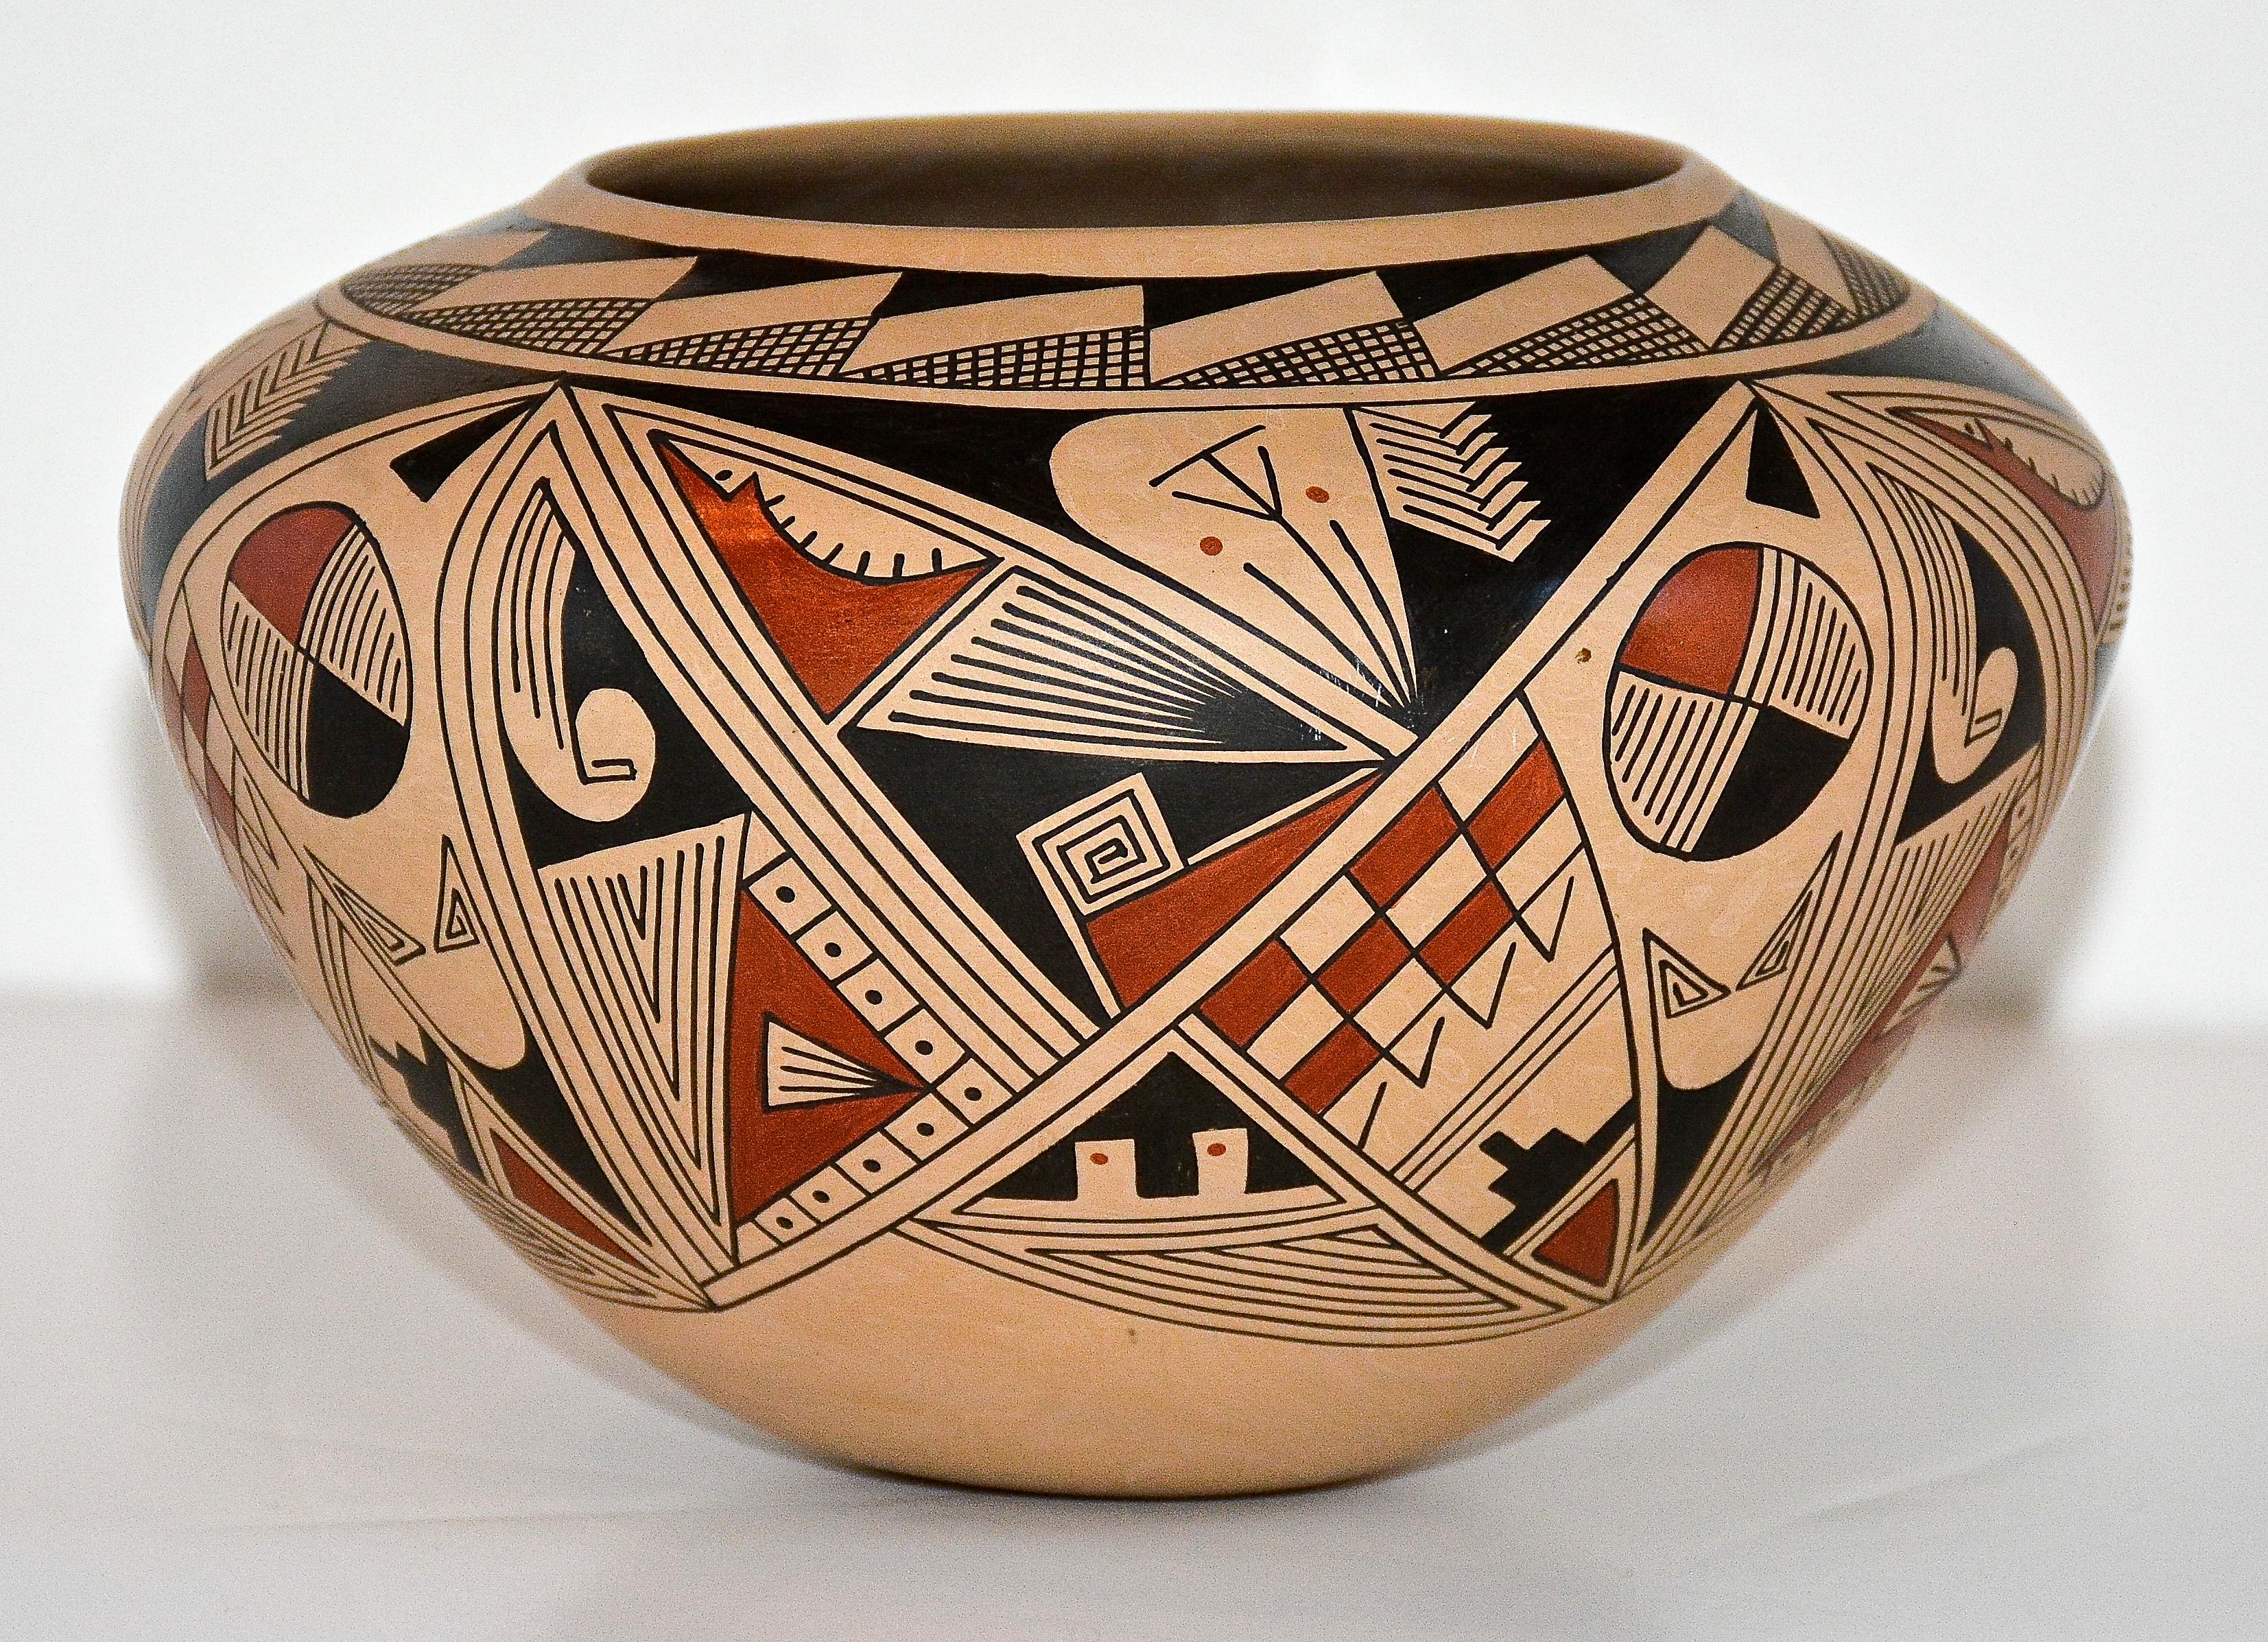 Mata Ortiz polychrome pottery vessel
Ramiro Veloz Sr., Master Potter
1990
Hand-Coiled low fire clay
Pueblo Quezada, Mata Ortiz, Chihuahua, Mexico

An extraordinary ultra thin walled example of hand - coiled Mata Ortiz pottery by Master Potter Ramiro